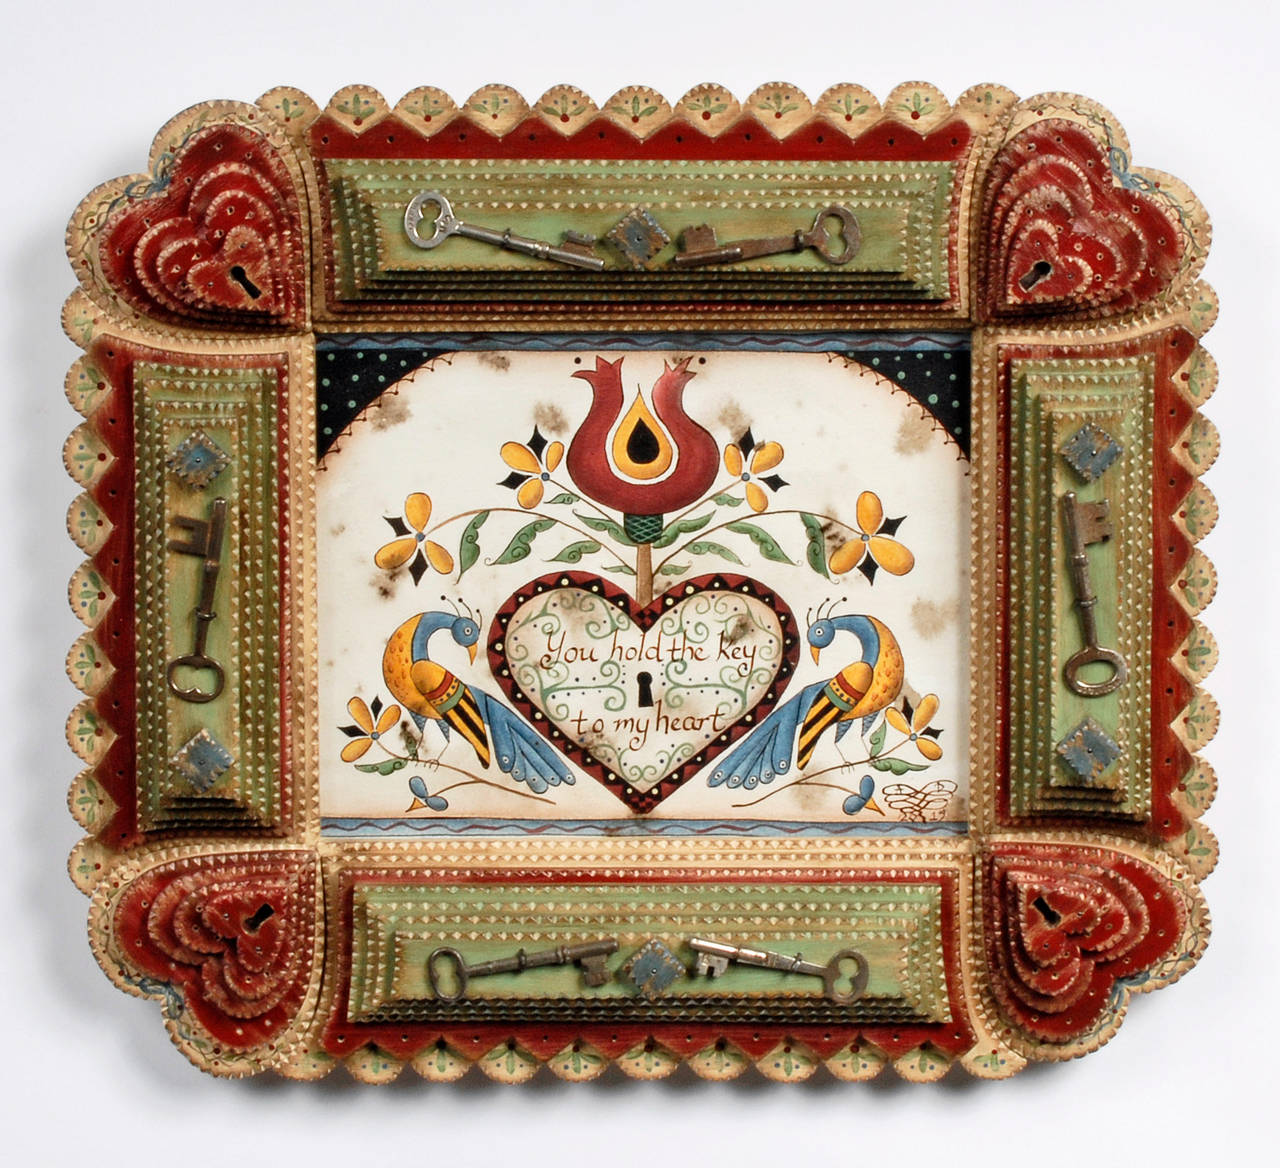 A fine 'Key to My Heart' tramp art frame by contempoary artist Angie Dow with a fluid watercolor of birds, hearts and flowers.